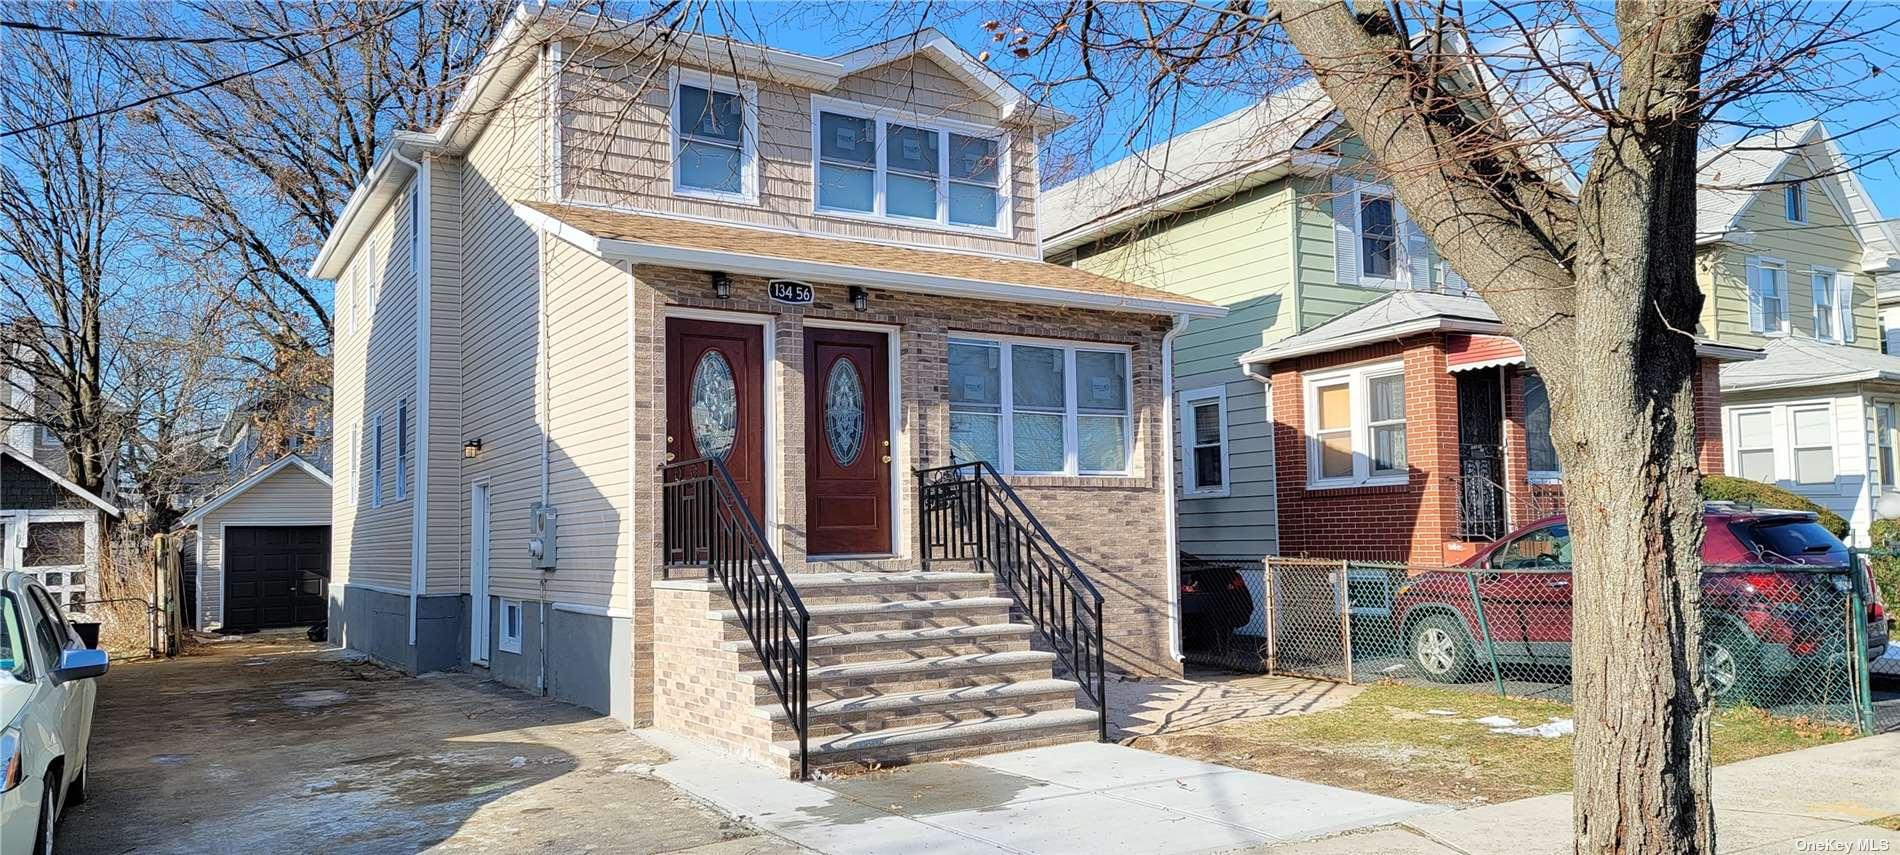 134-56 176 Street in Queens, Springfield Gdns, NY 11413